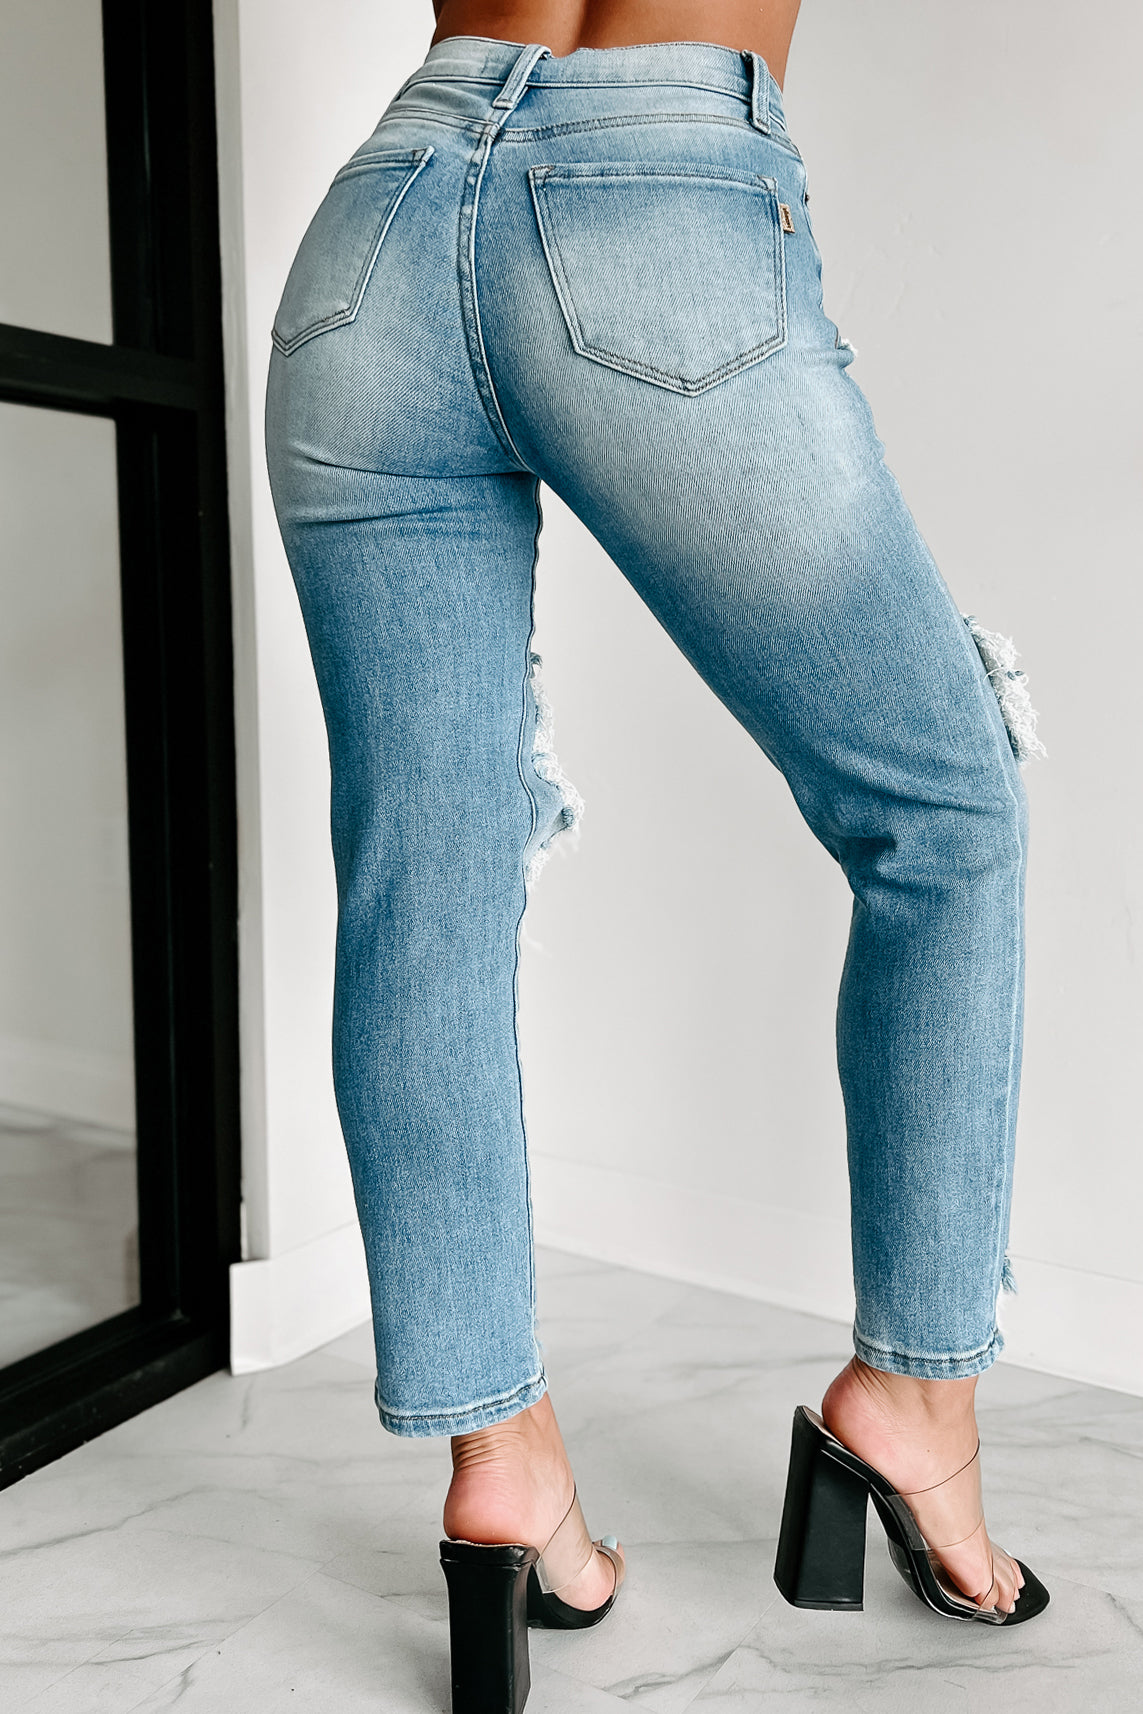 Find your rise! Which denim rise is right for you? 1. LOW RISE